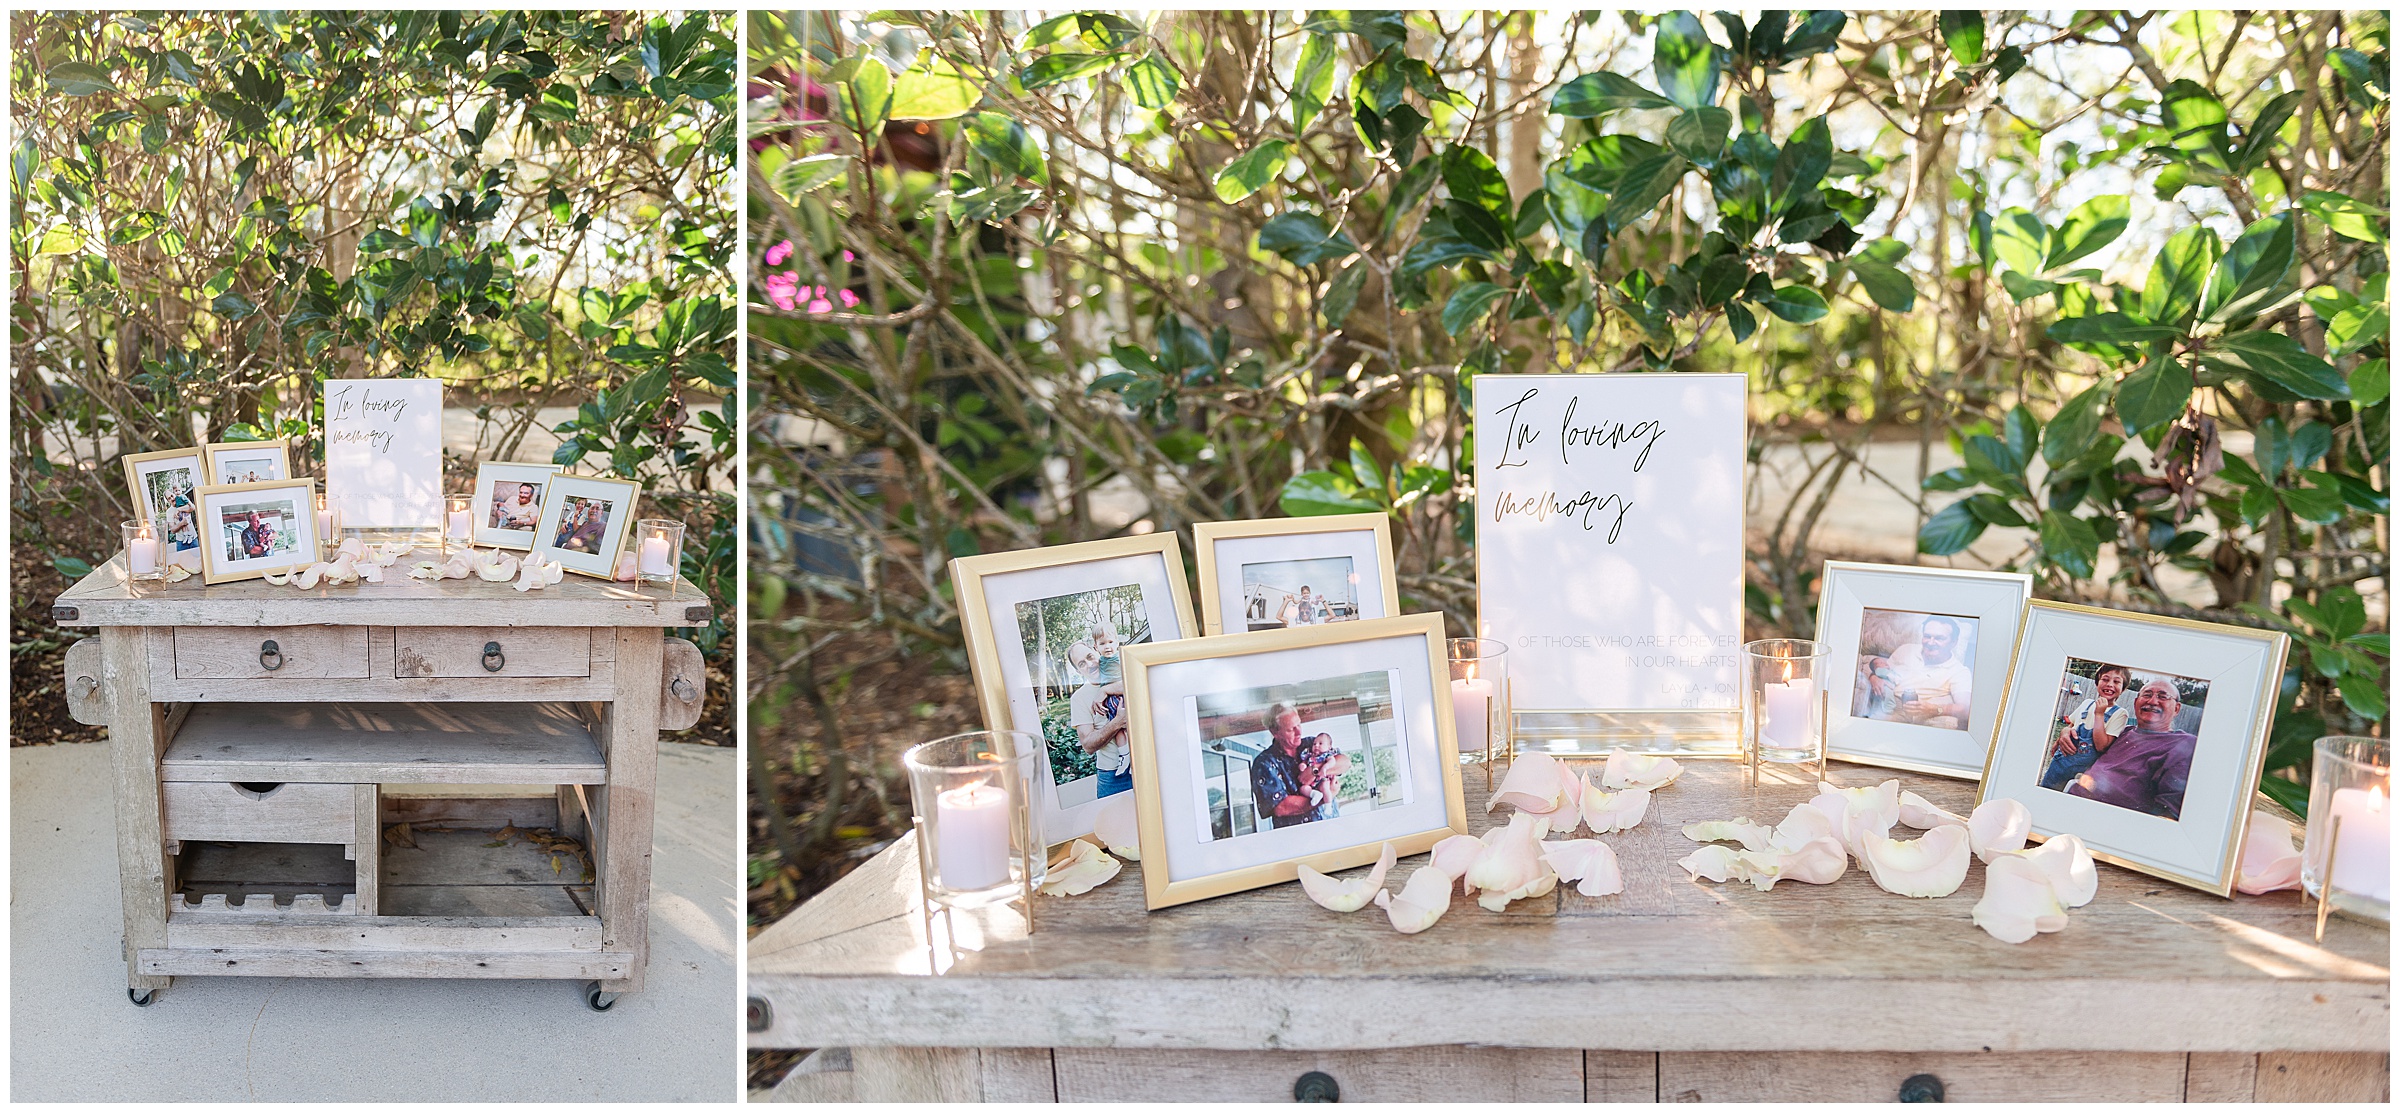 In loving memory table setup with photos at a Magnolia Manor Wedding in Vero Beach, Florida